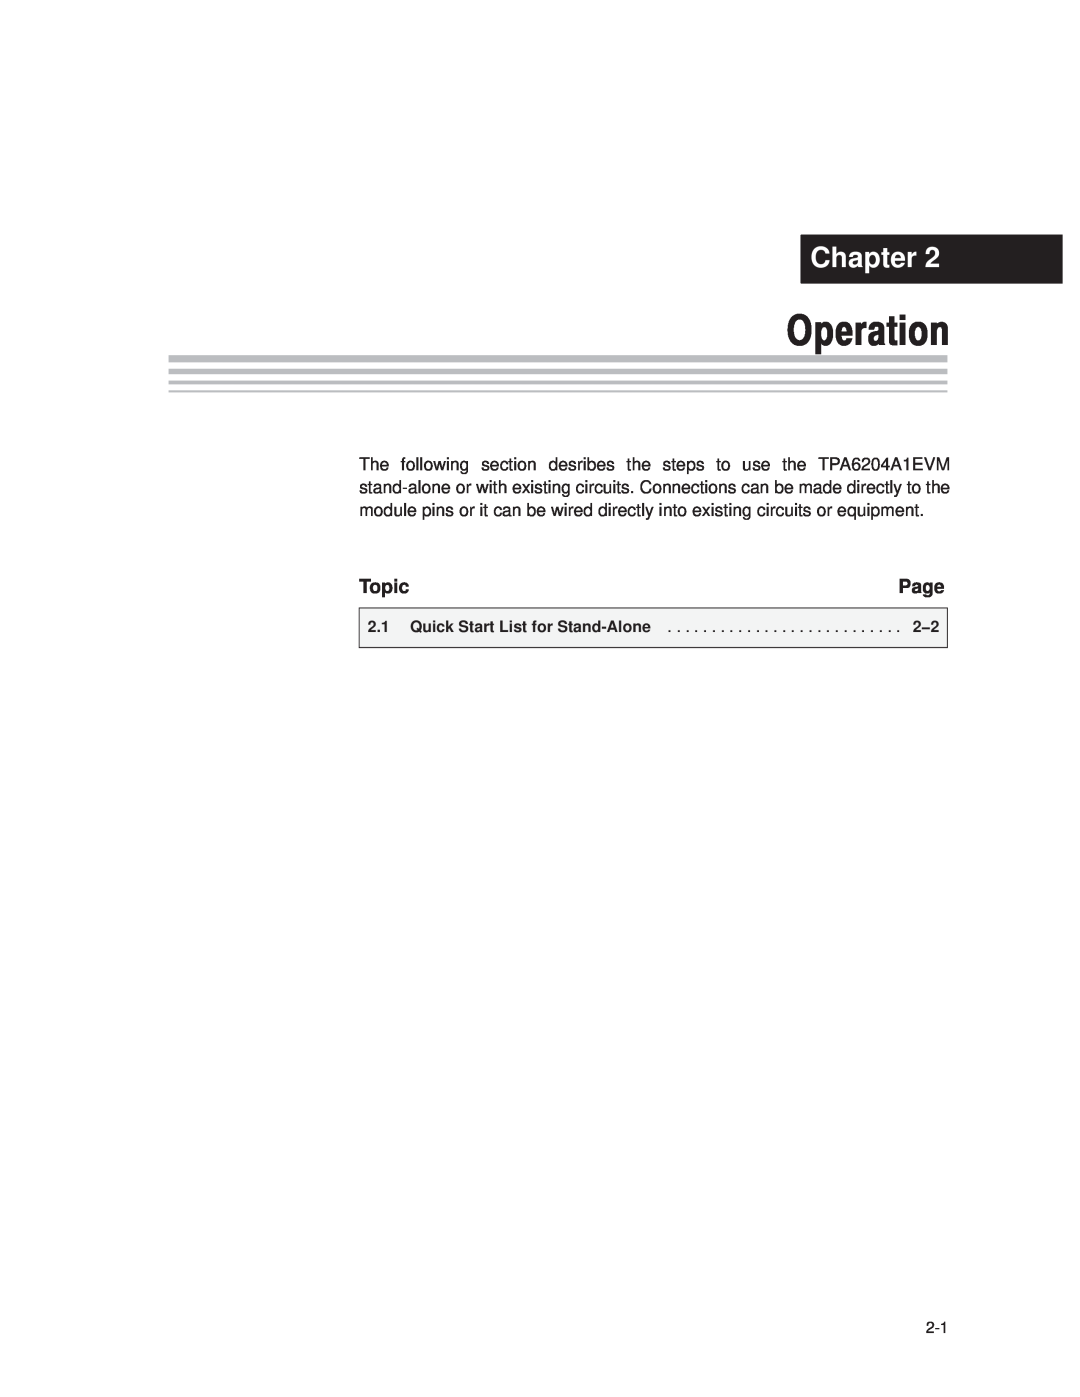 Texas Instruments TPA6204A1 manual Operation, Topic, Chapter, Page, Quick Start List for Stand-Alone 